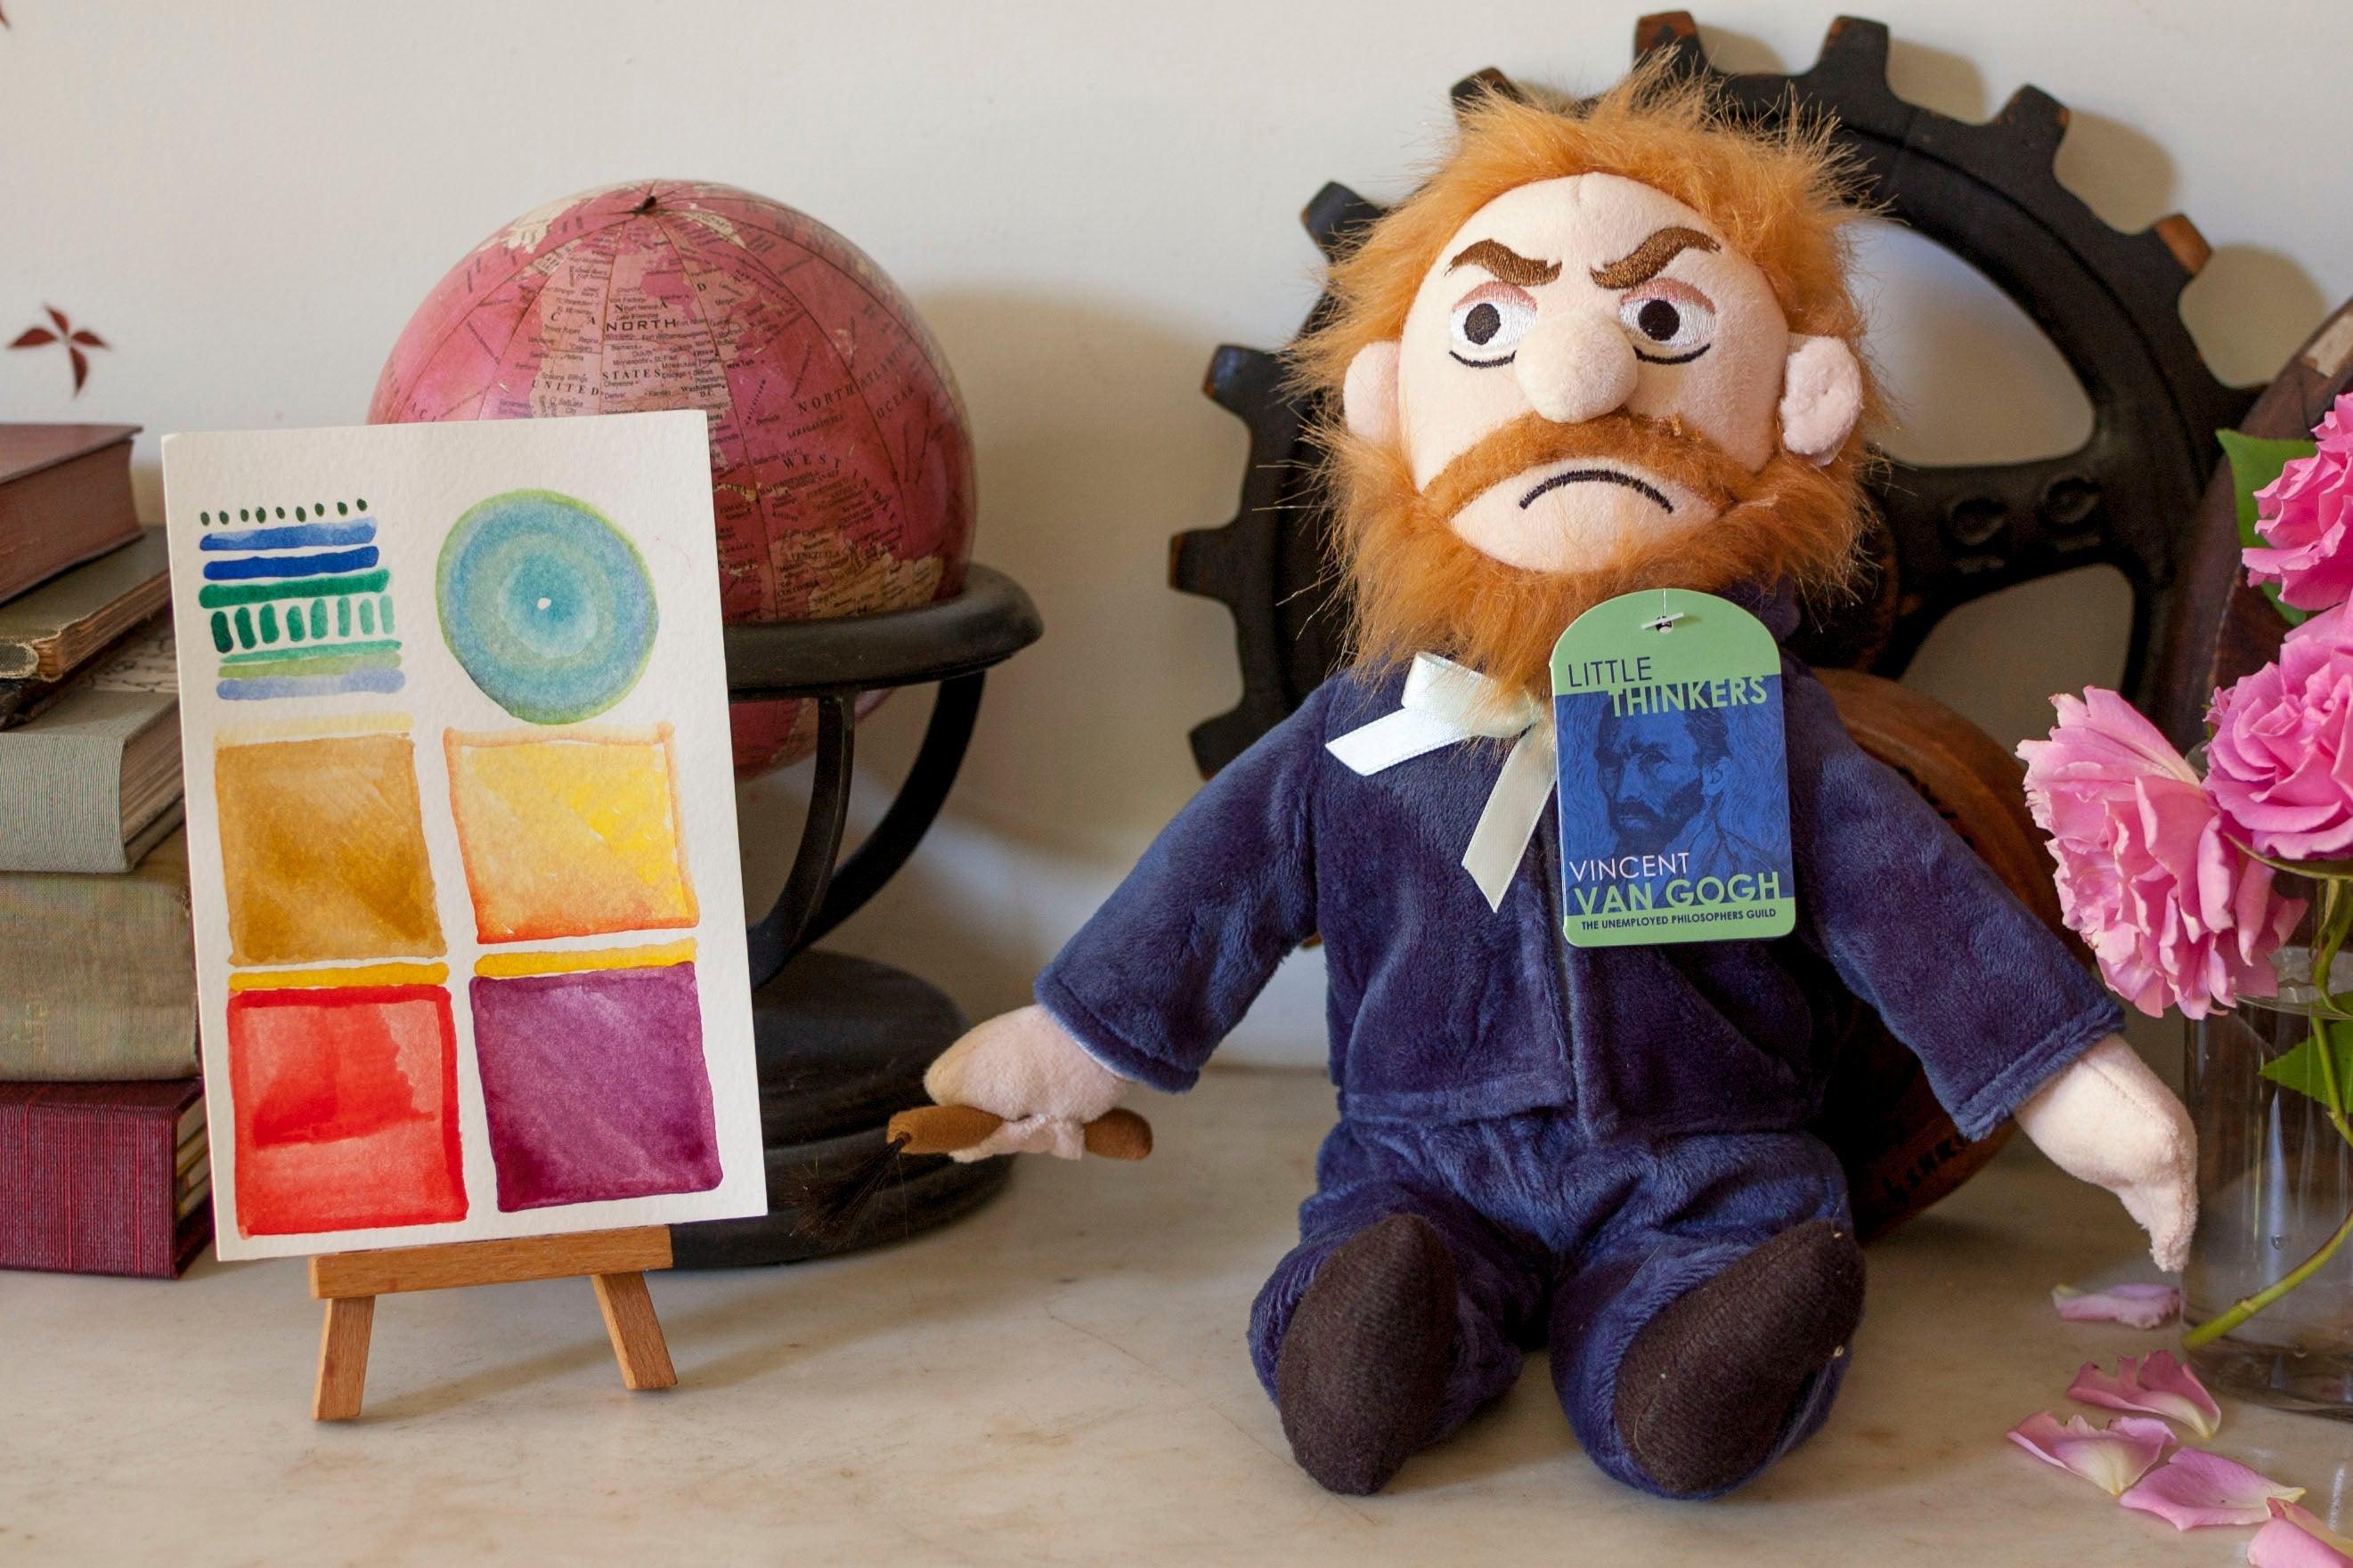 Product photo of Vincent Van Gogh Plush Doll, a novelty gift manufactured by The Unemployed Philosophers Guild.